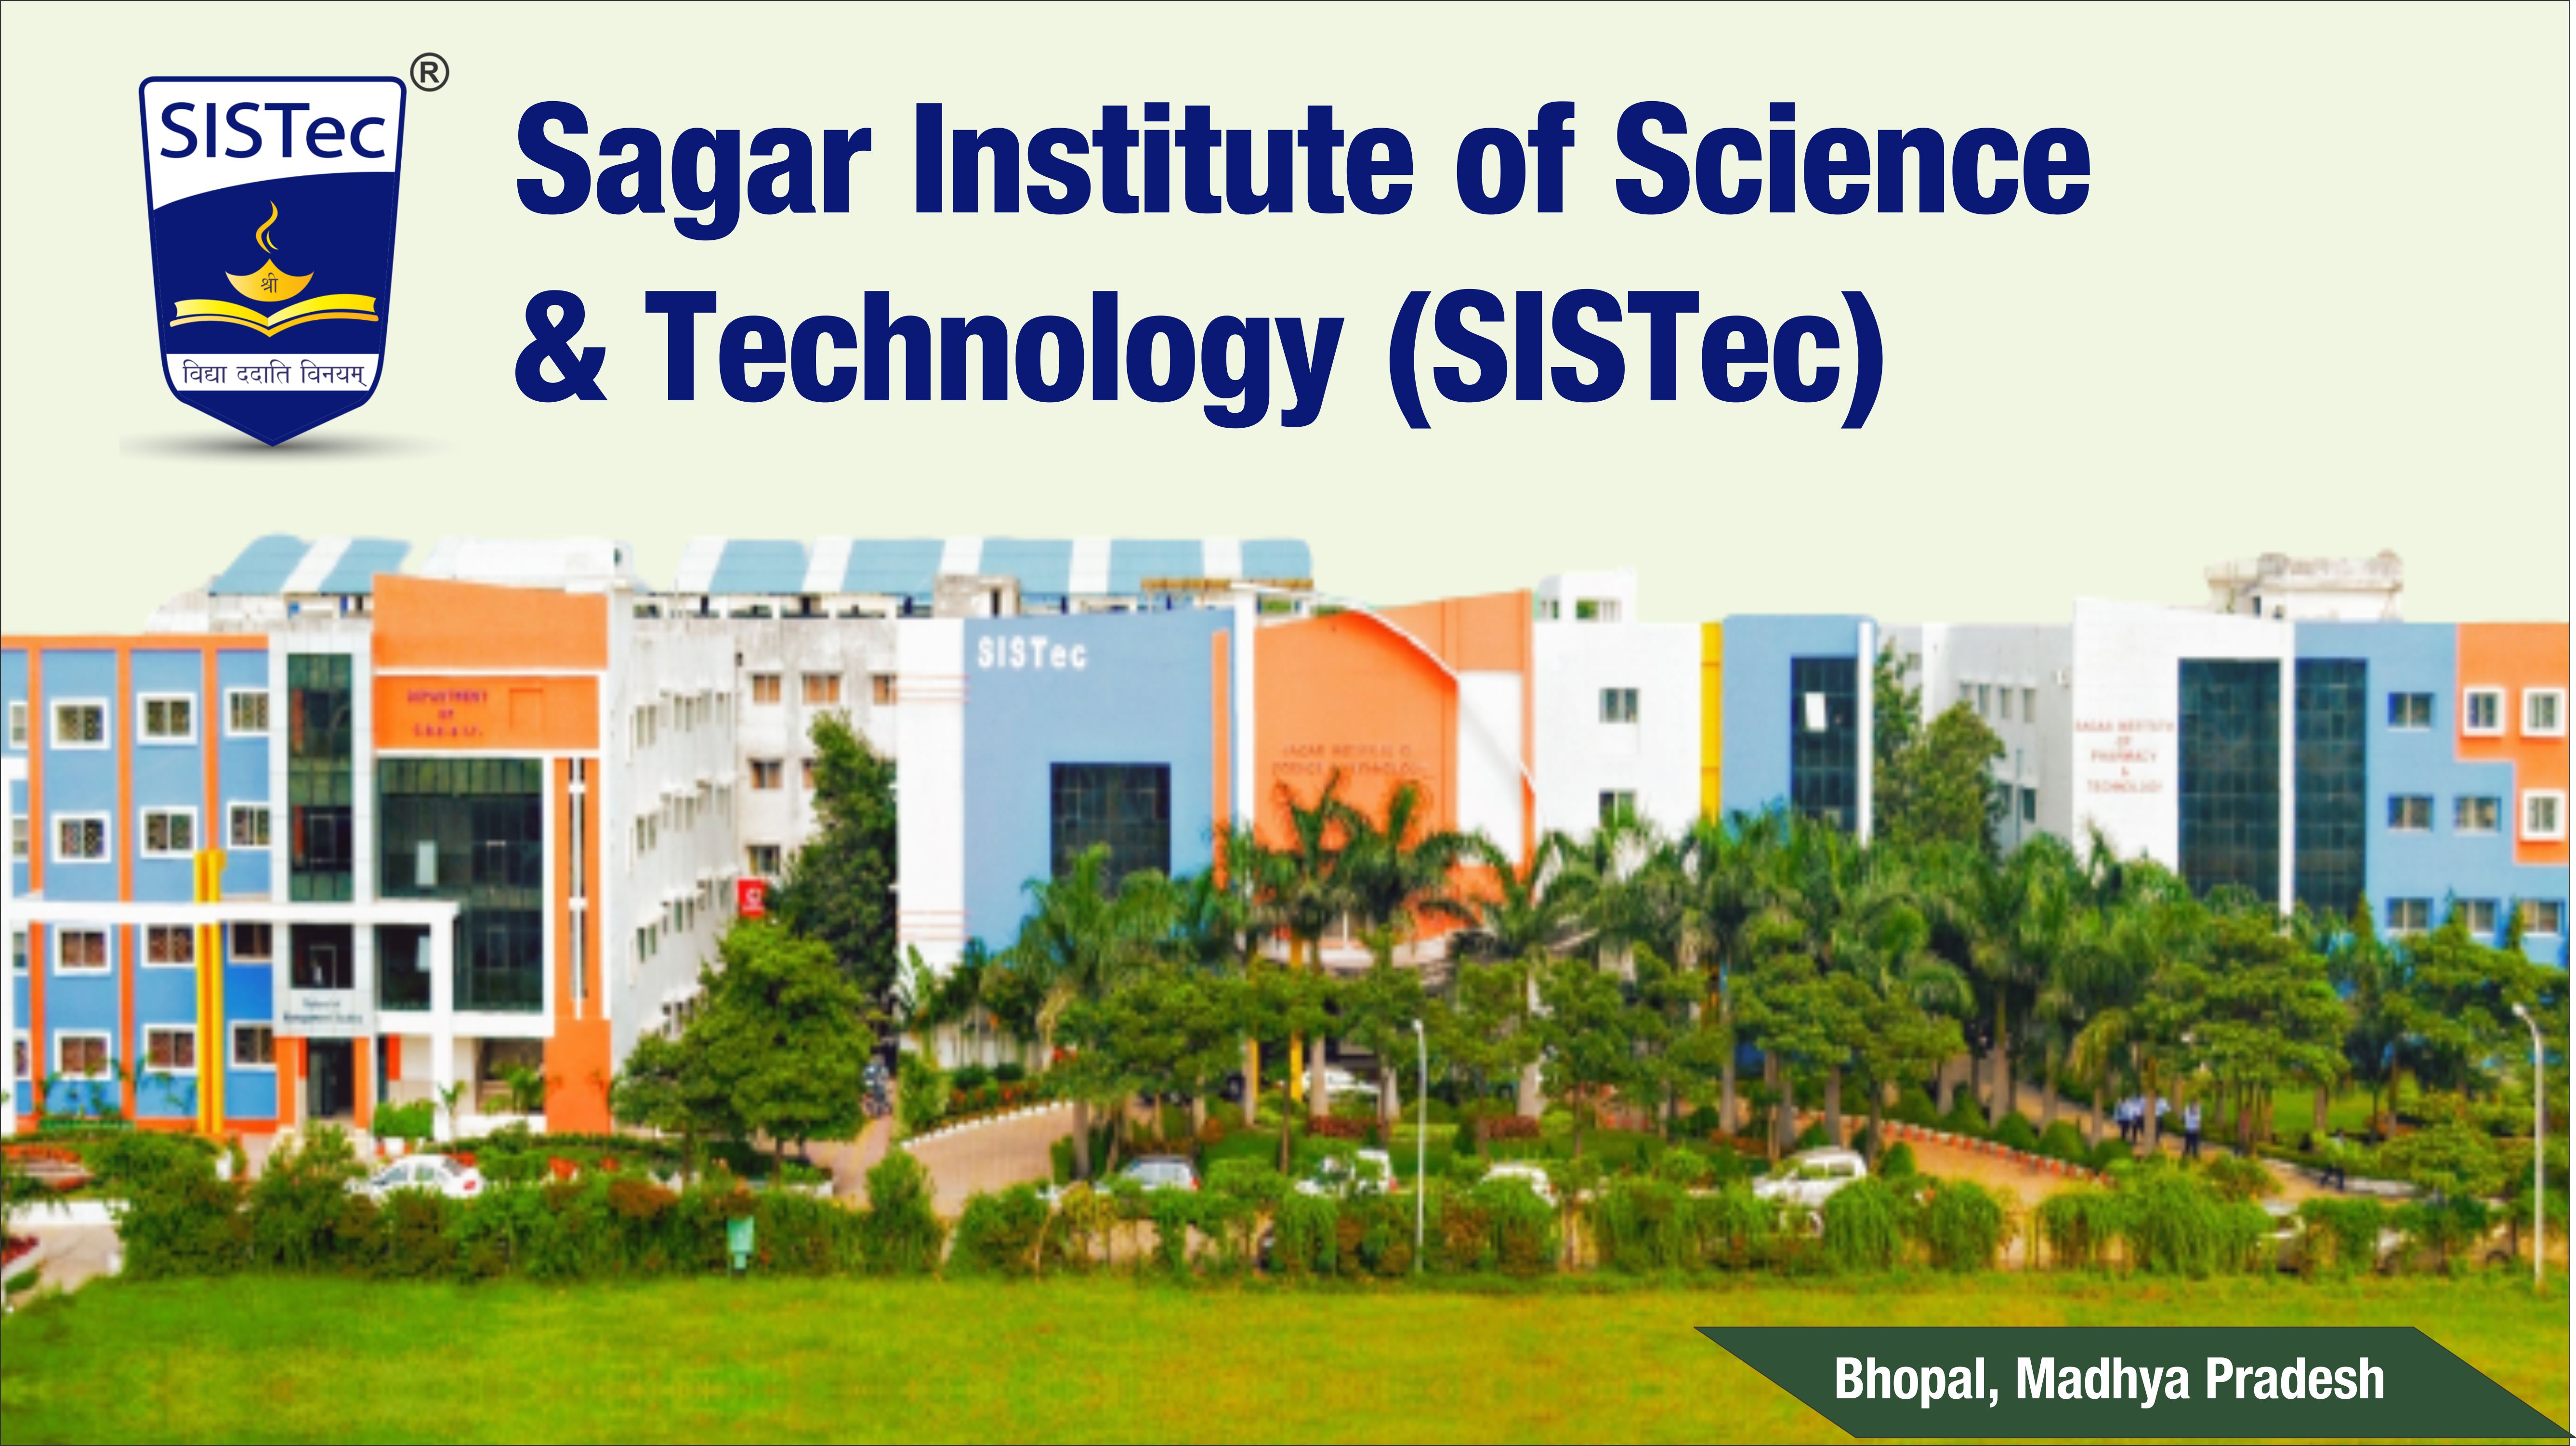 out side view of Sagar Institute of Science & Technology (SISTEC)